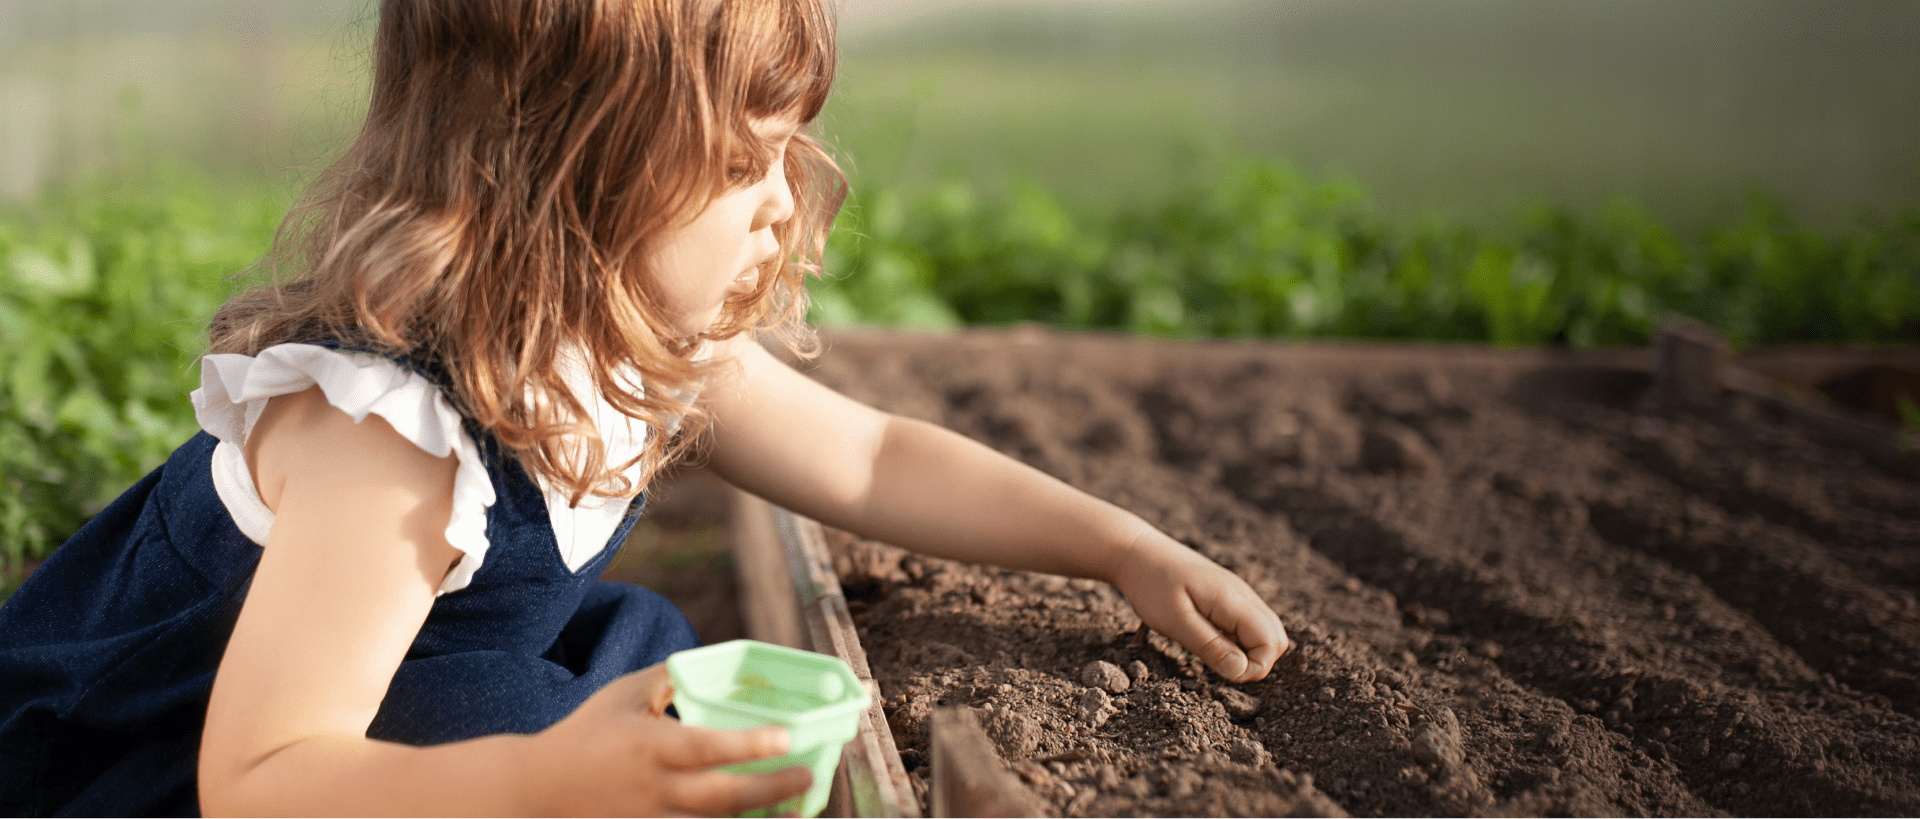 Image showing a little girl planting